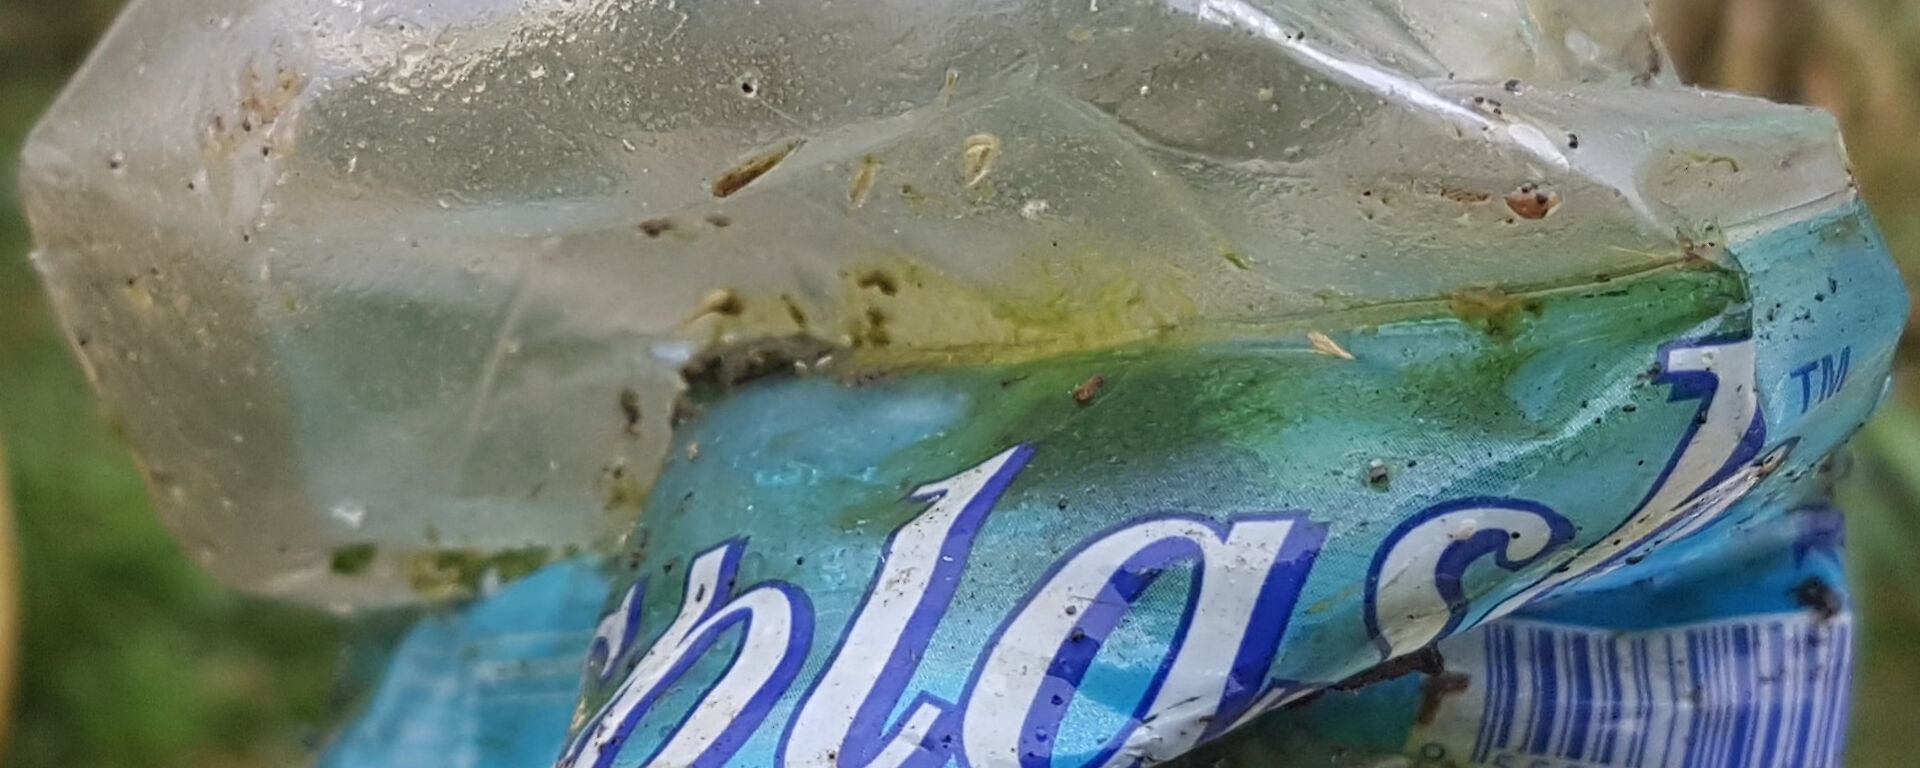 A crumpled clear plastic water bottle with label still attached